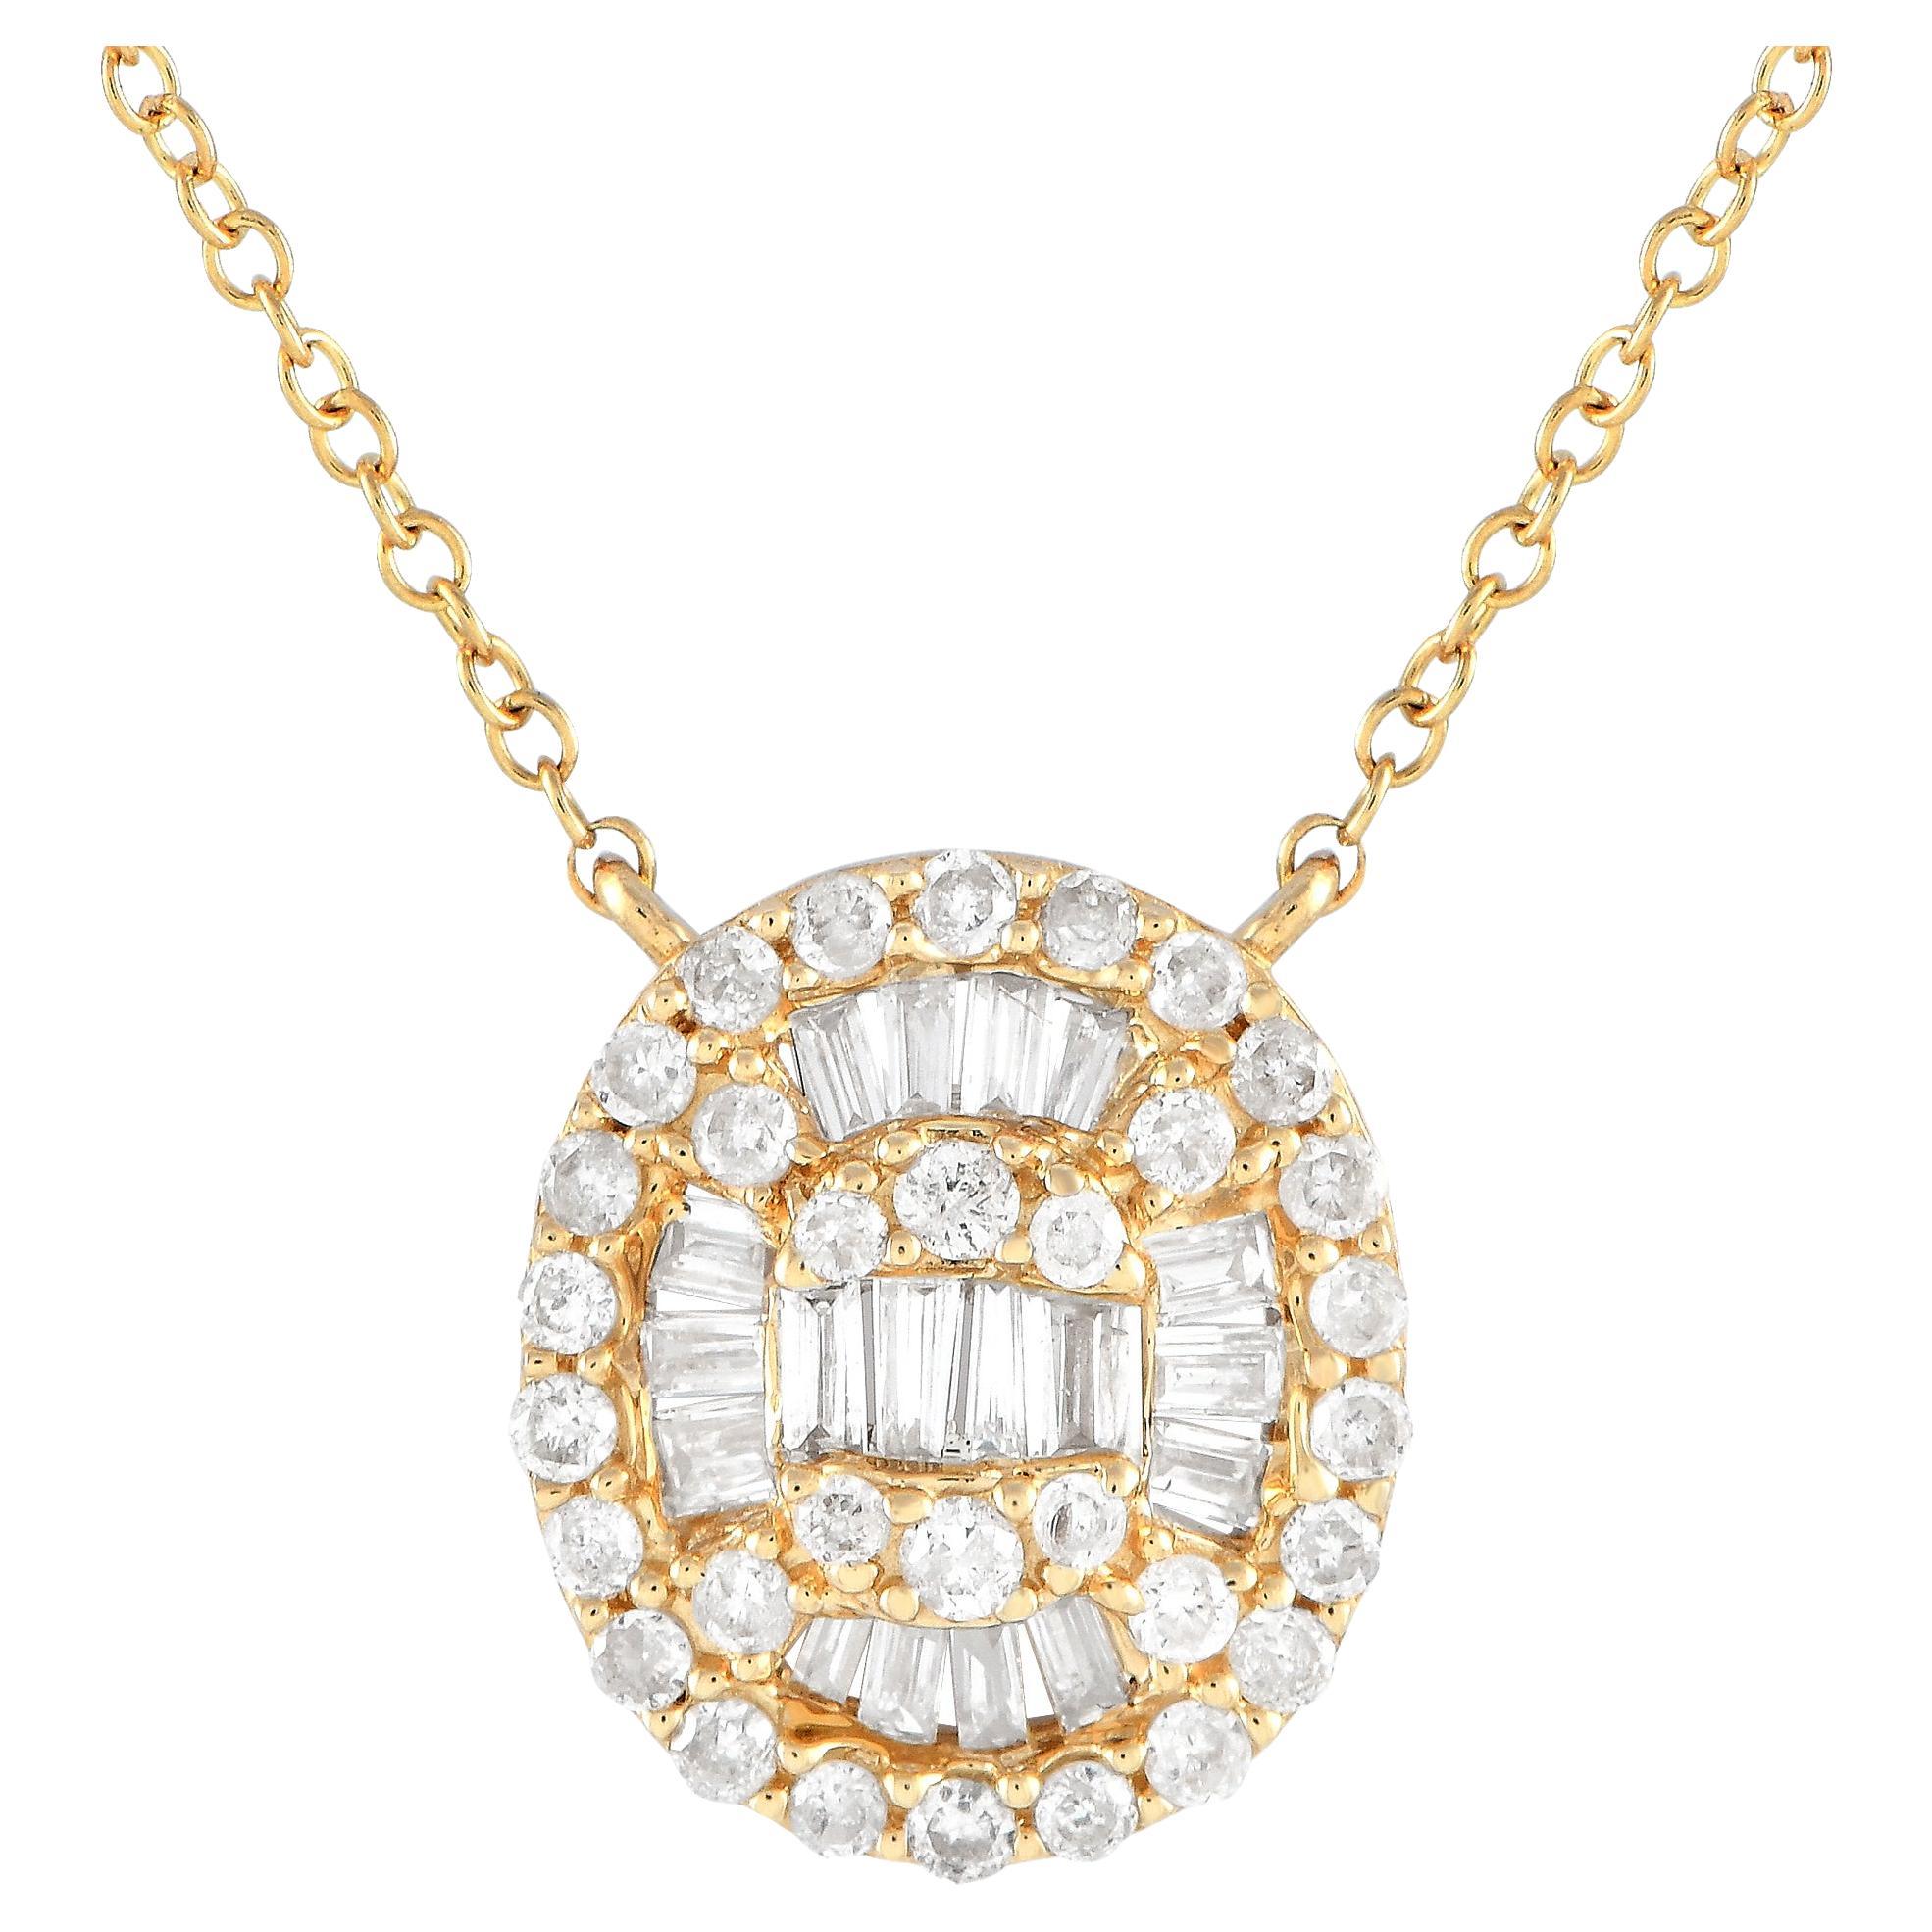 LB Exclusive 14K Yellow Gold 0.31ct Diamond Cluster Necklace PN14719 For Sale